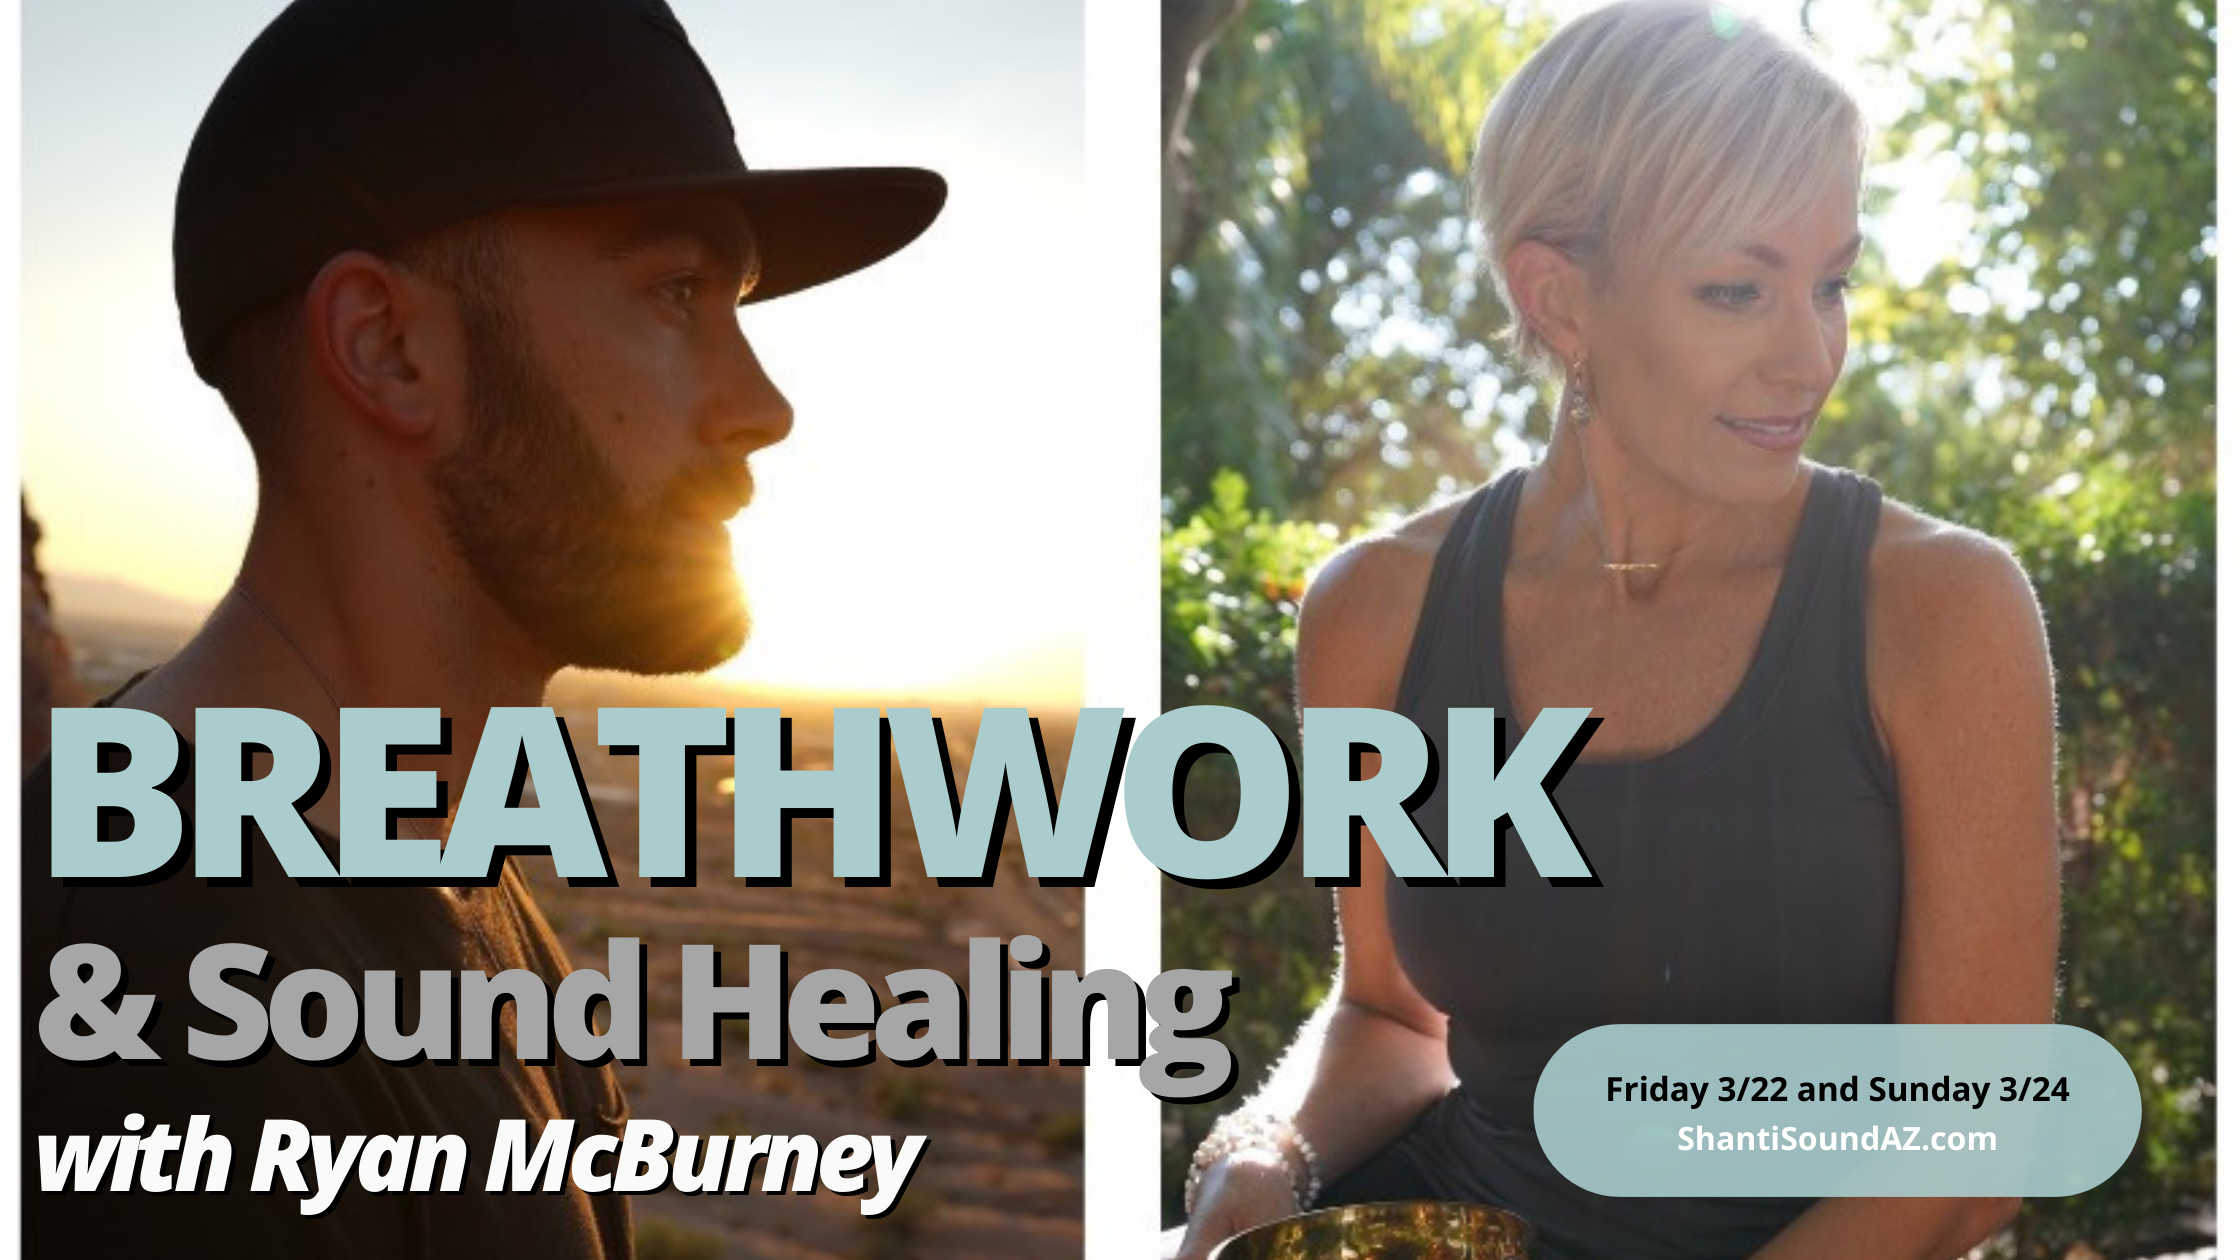 Featured image for “March Breathwork and Sound Healing Experience”